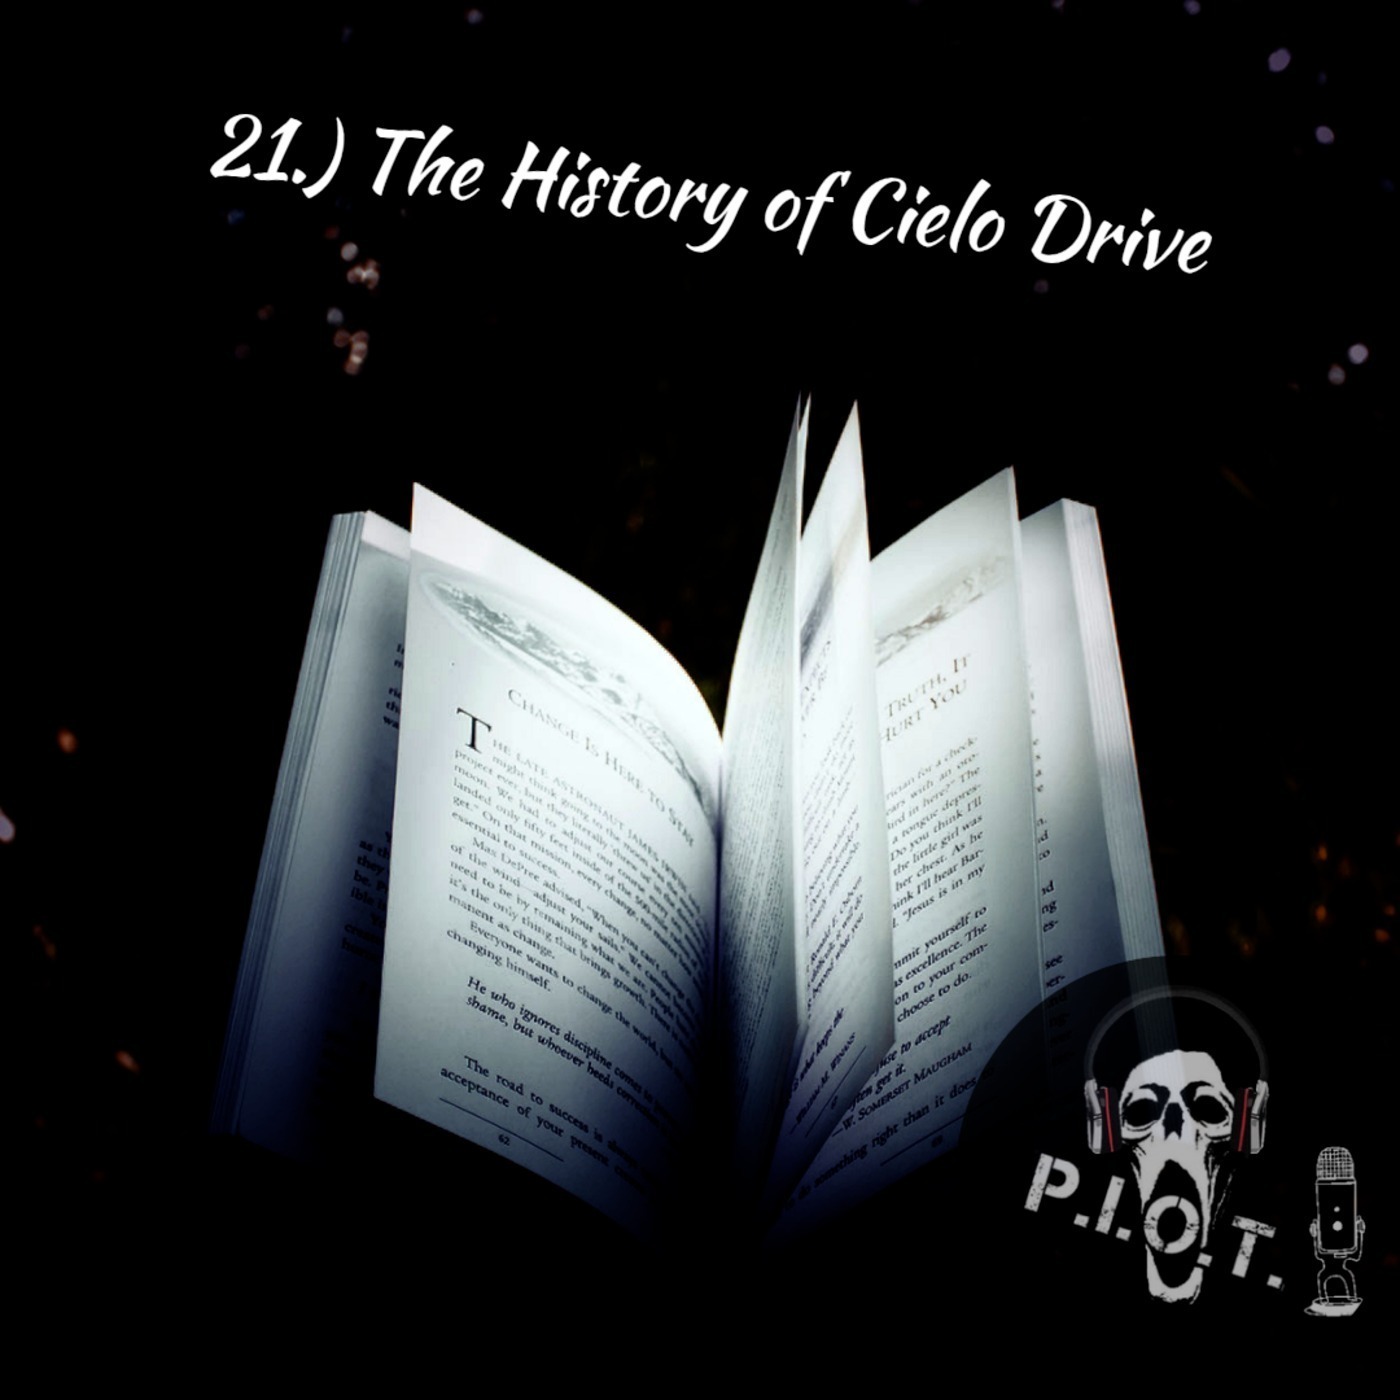 21.) The History of Cielo Drive